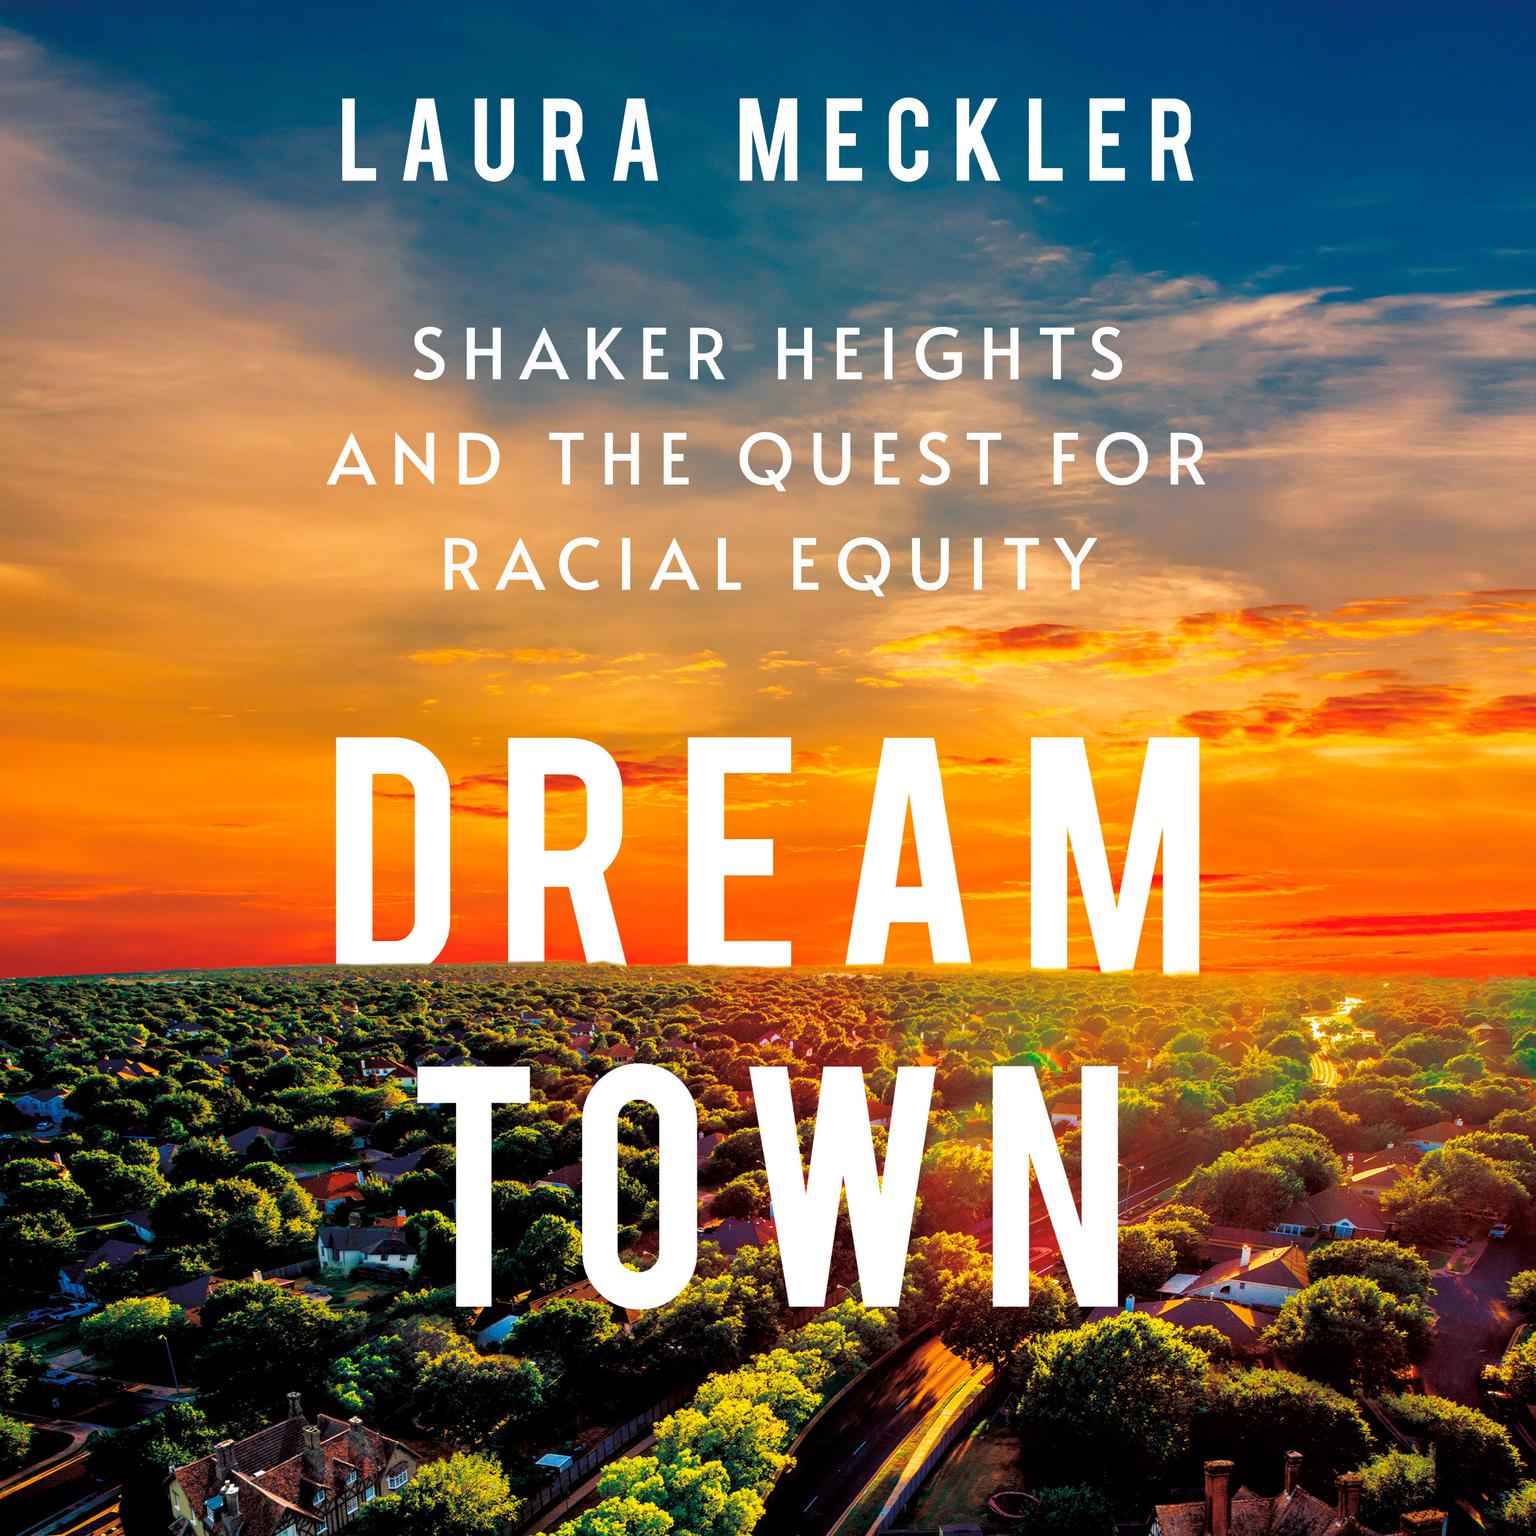 Dream Town: Shaker Heights and the Quest for Racial Equity Audiobook, by Laura Meckler